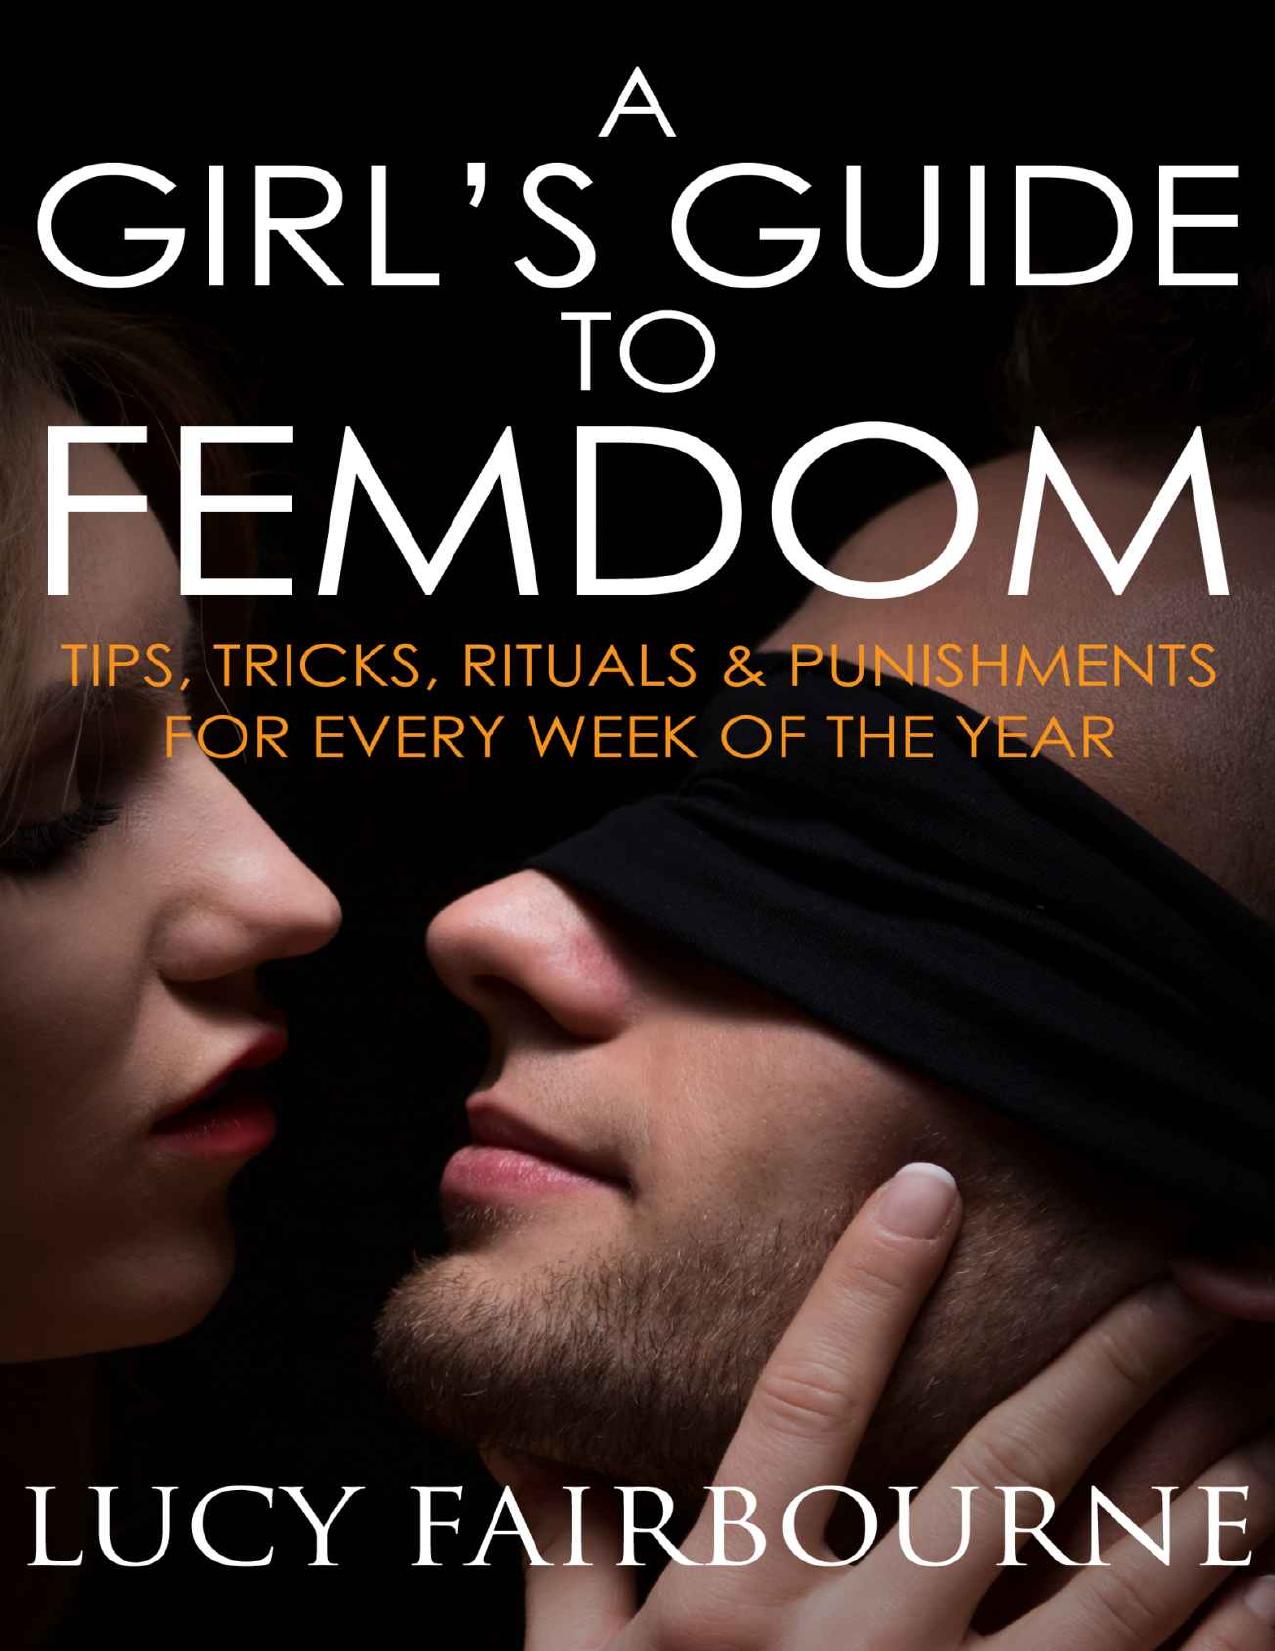 A Girl's Guide to Femdom by Fairbourne Lucy